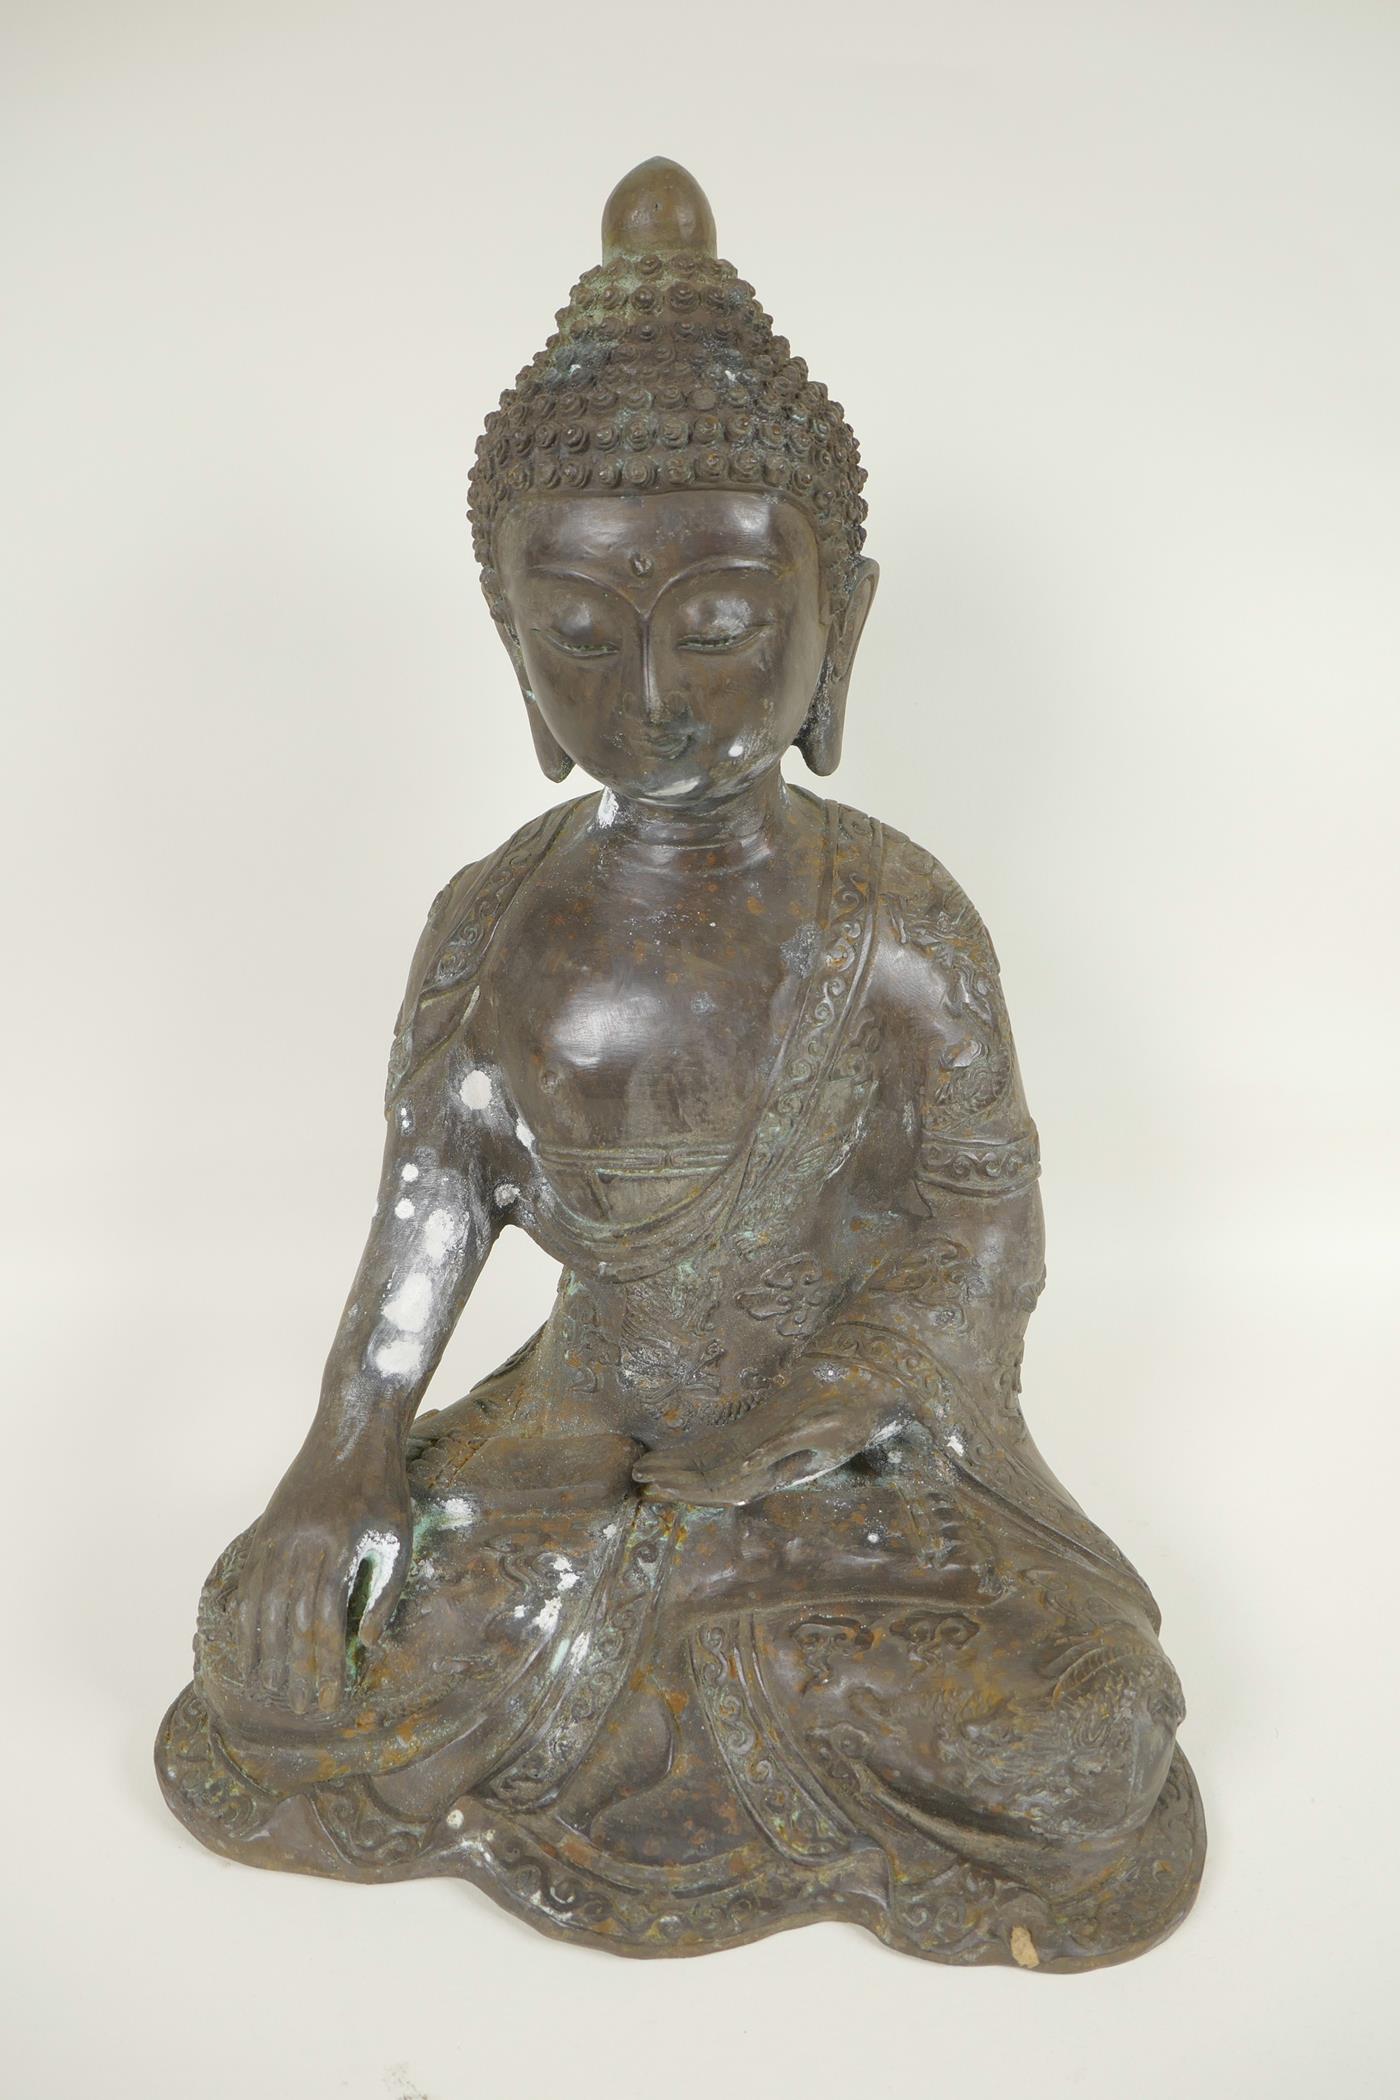 A Chinese cast bronze figure of Buddha seated in the lotus position whilst meditating, cast 6